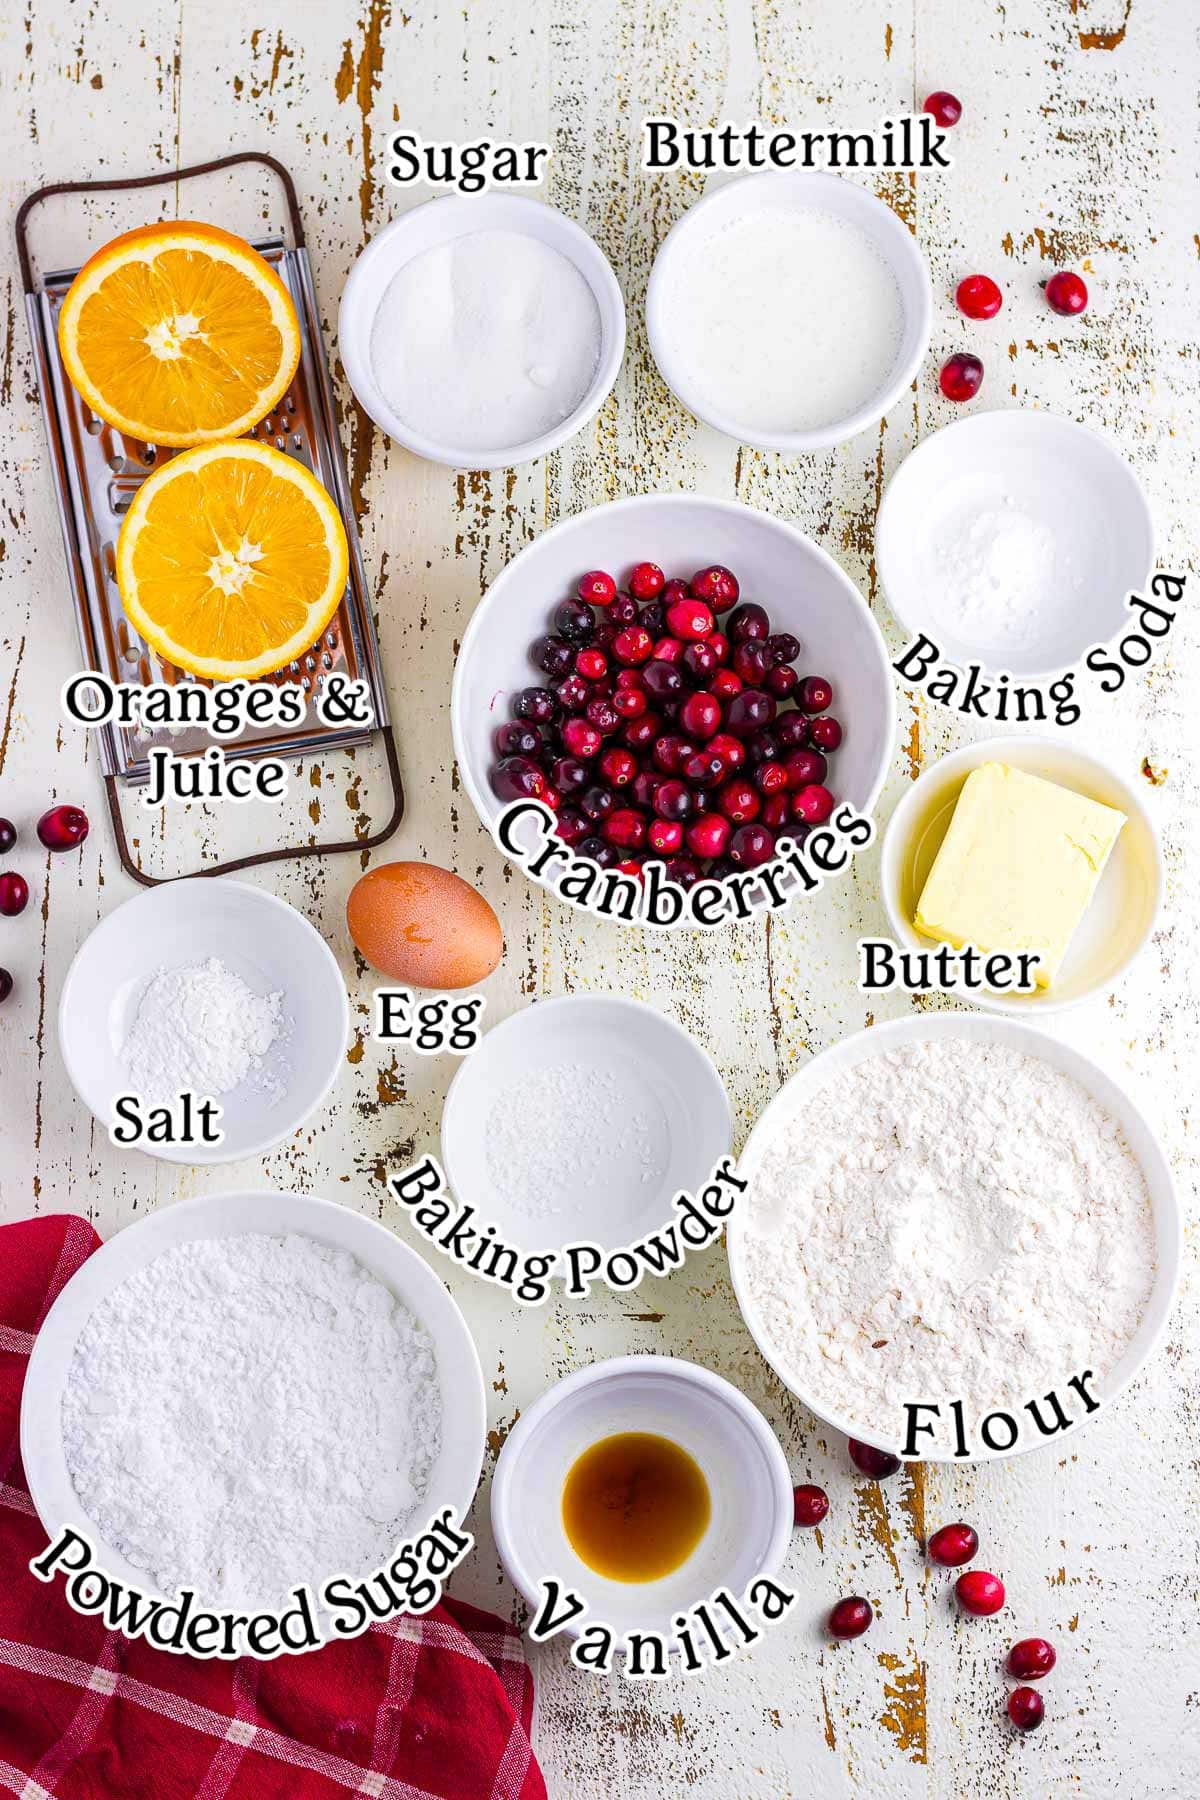 An overhead photo with text overlay showing the ingredients used in this scone recipe.